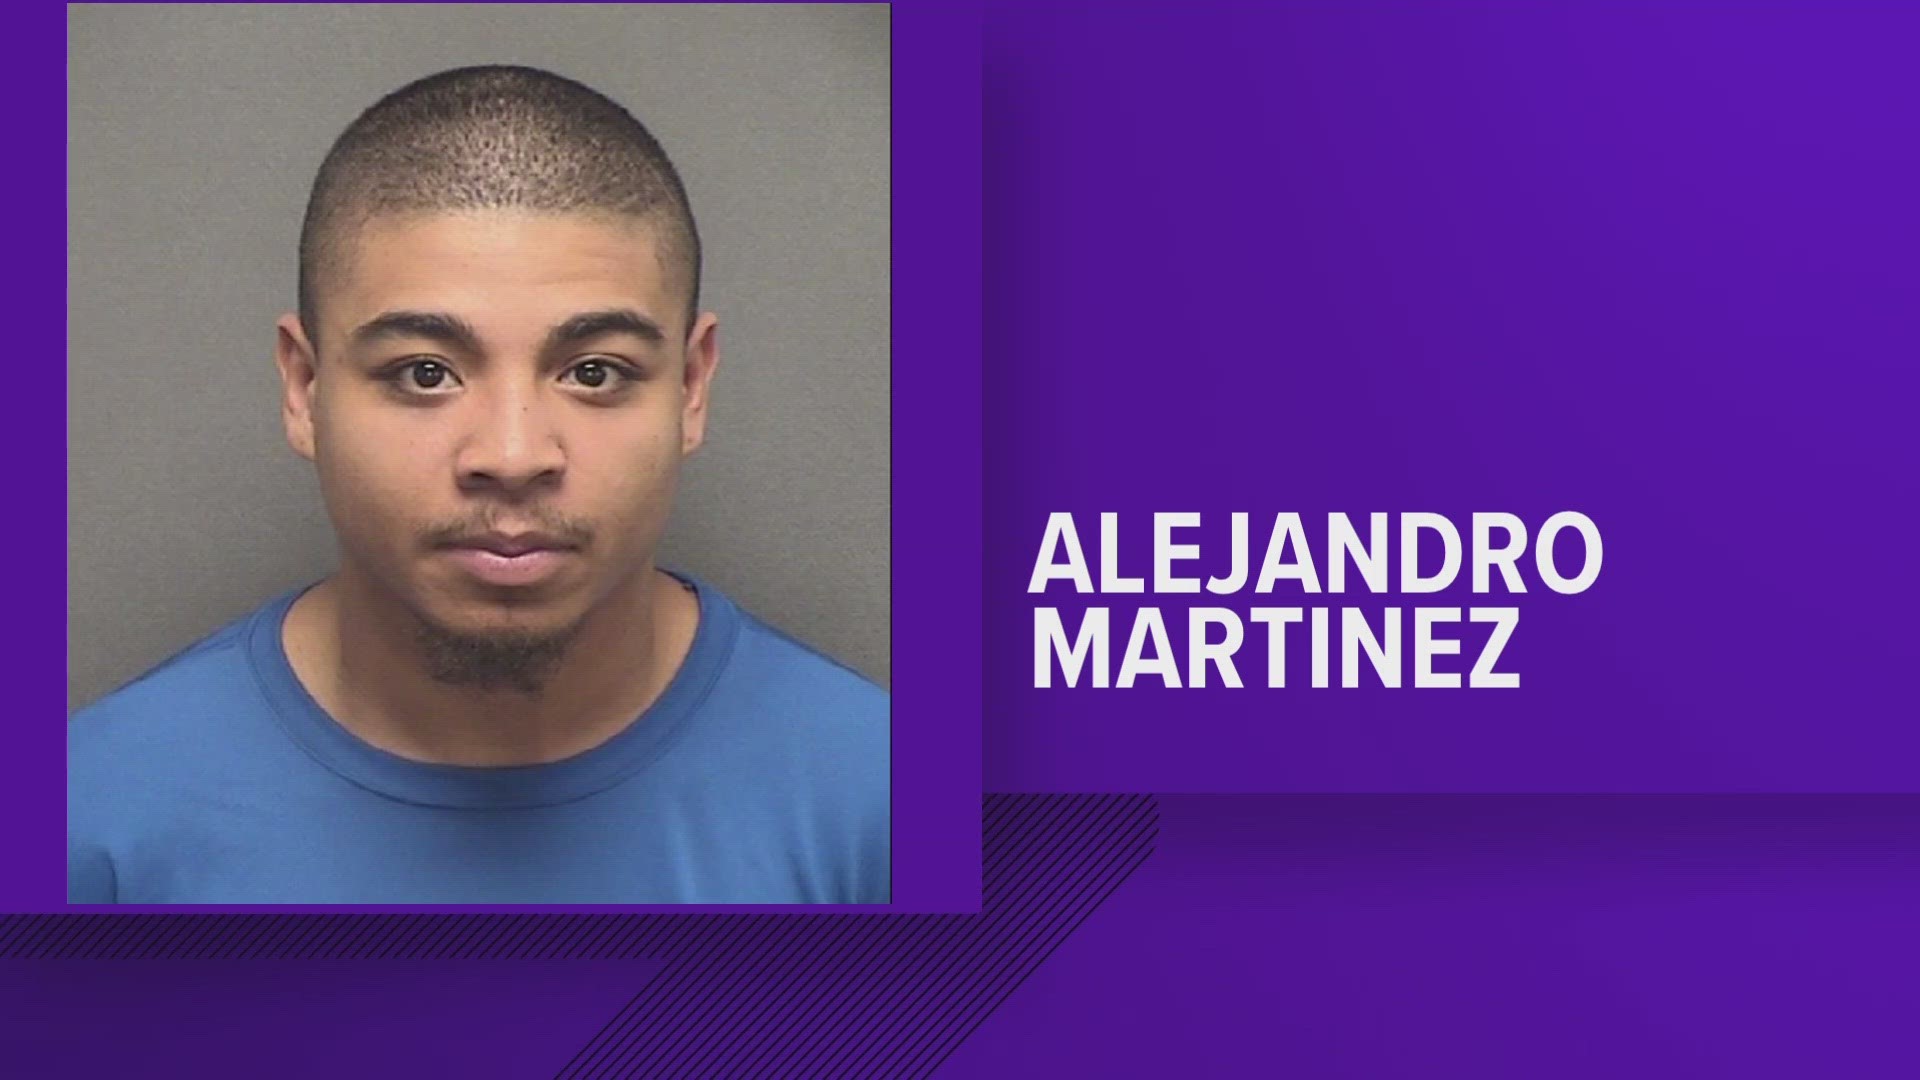 SAPD said Alejandro Martinez was taken into custody Saturday, nearly a month after a fight over a gun ended with a gunshot that killed his 8-month-old daughter.